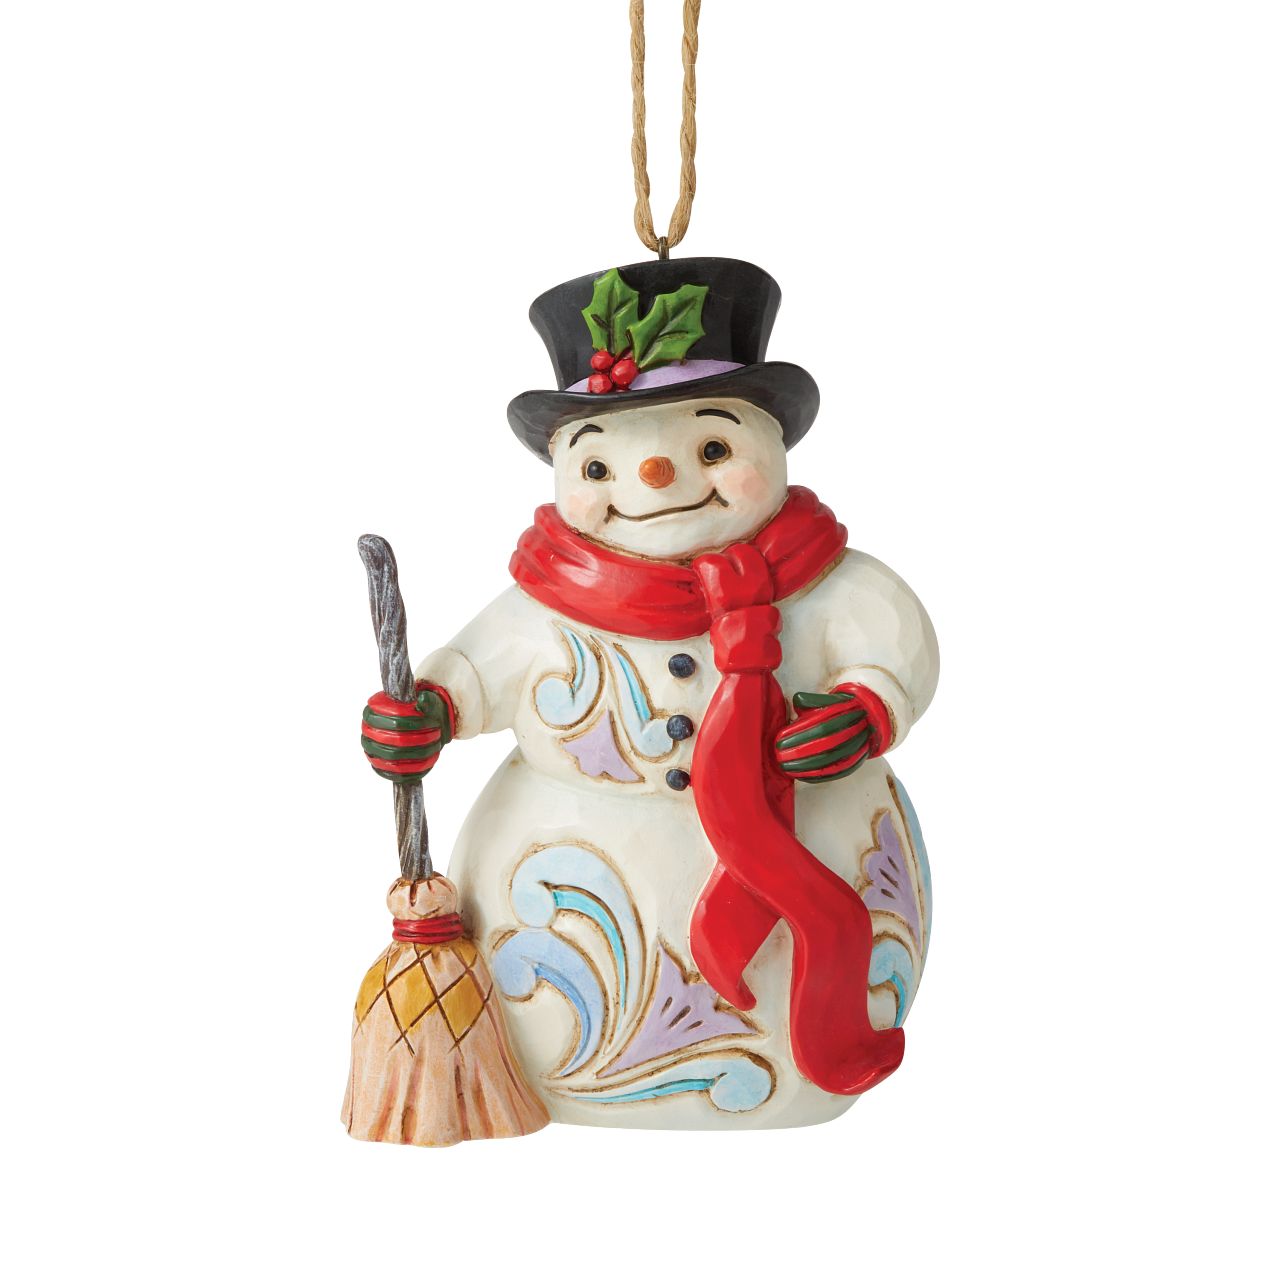 Jim Shore Heartwood Creek Snowman Scarf and Broom Hanging Ornament  Designed by award-winning artist and sculptor Jim Shore for Heartwood Creek. Ornament hangs by jute rope and features a handcrafted look.